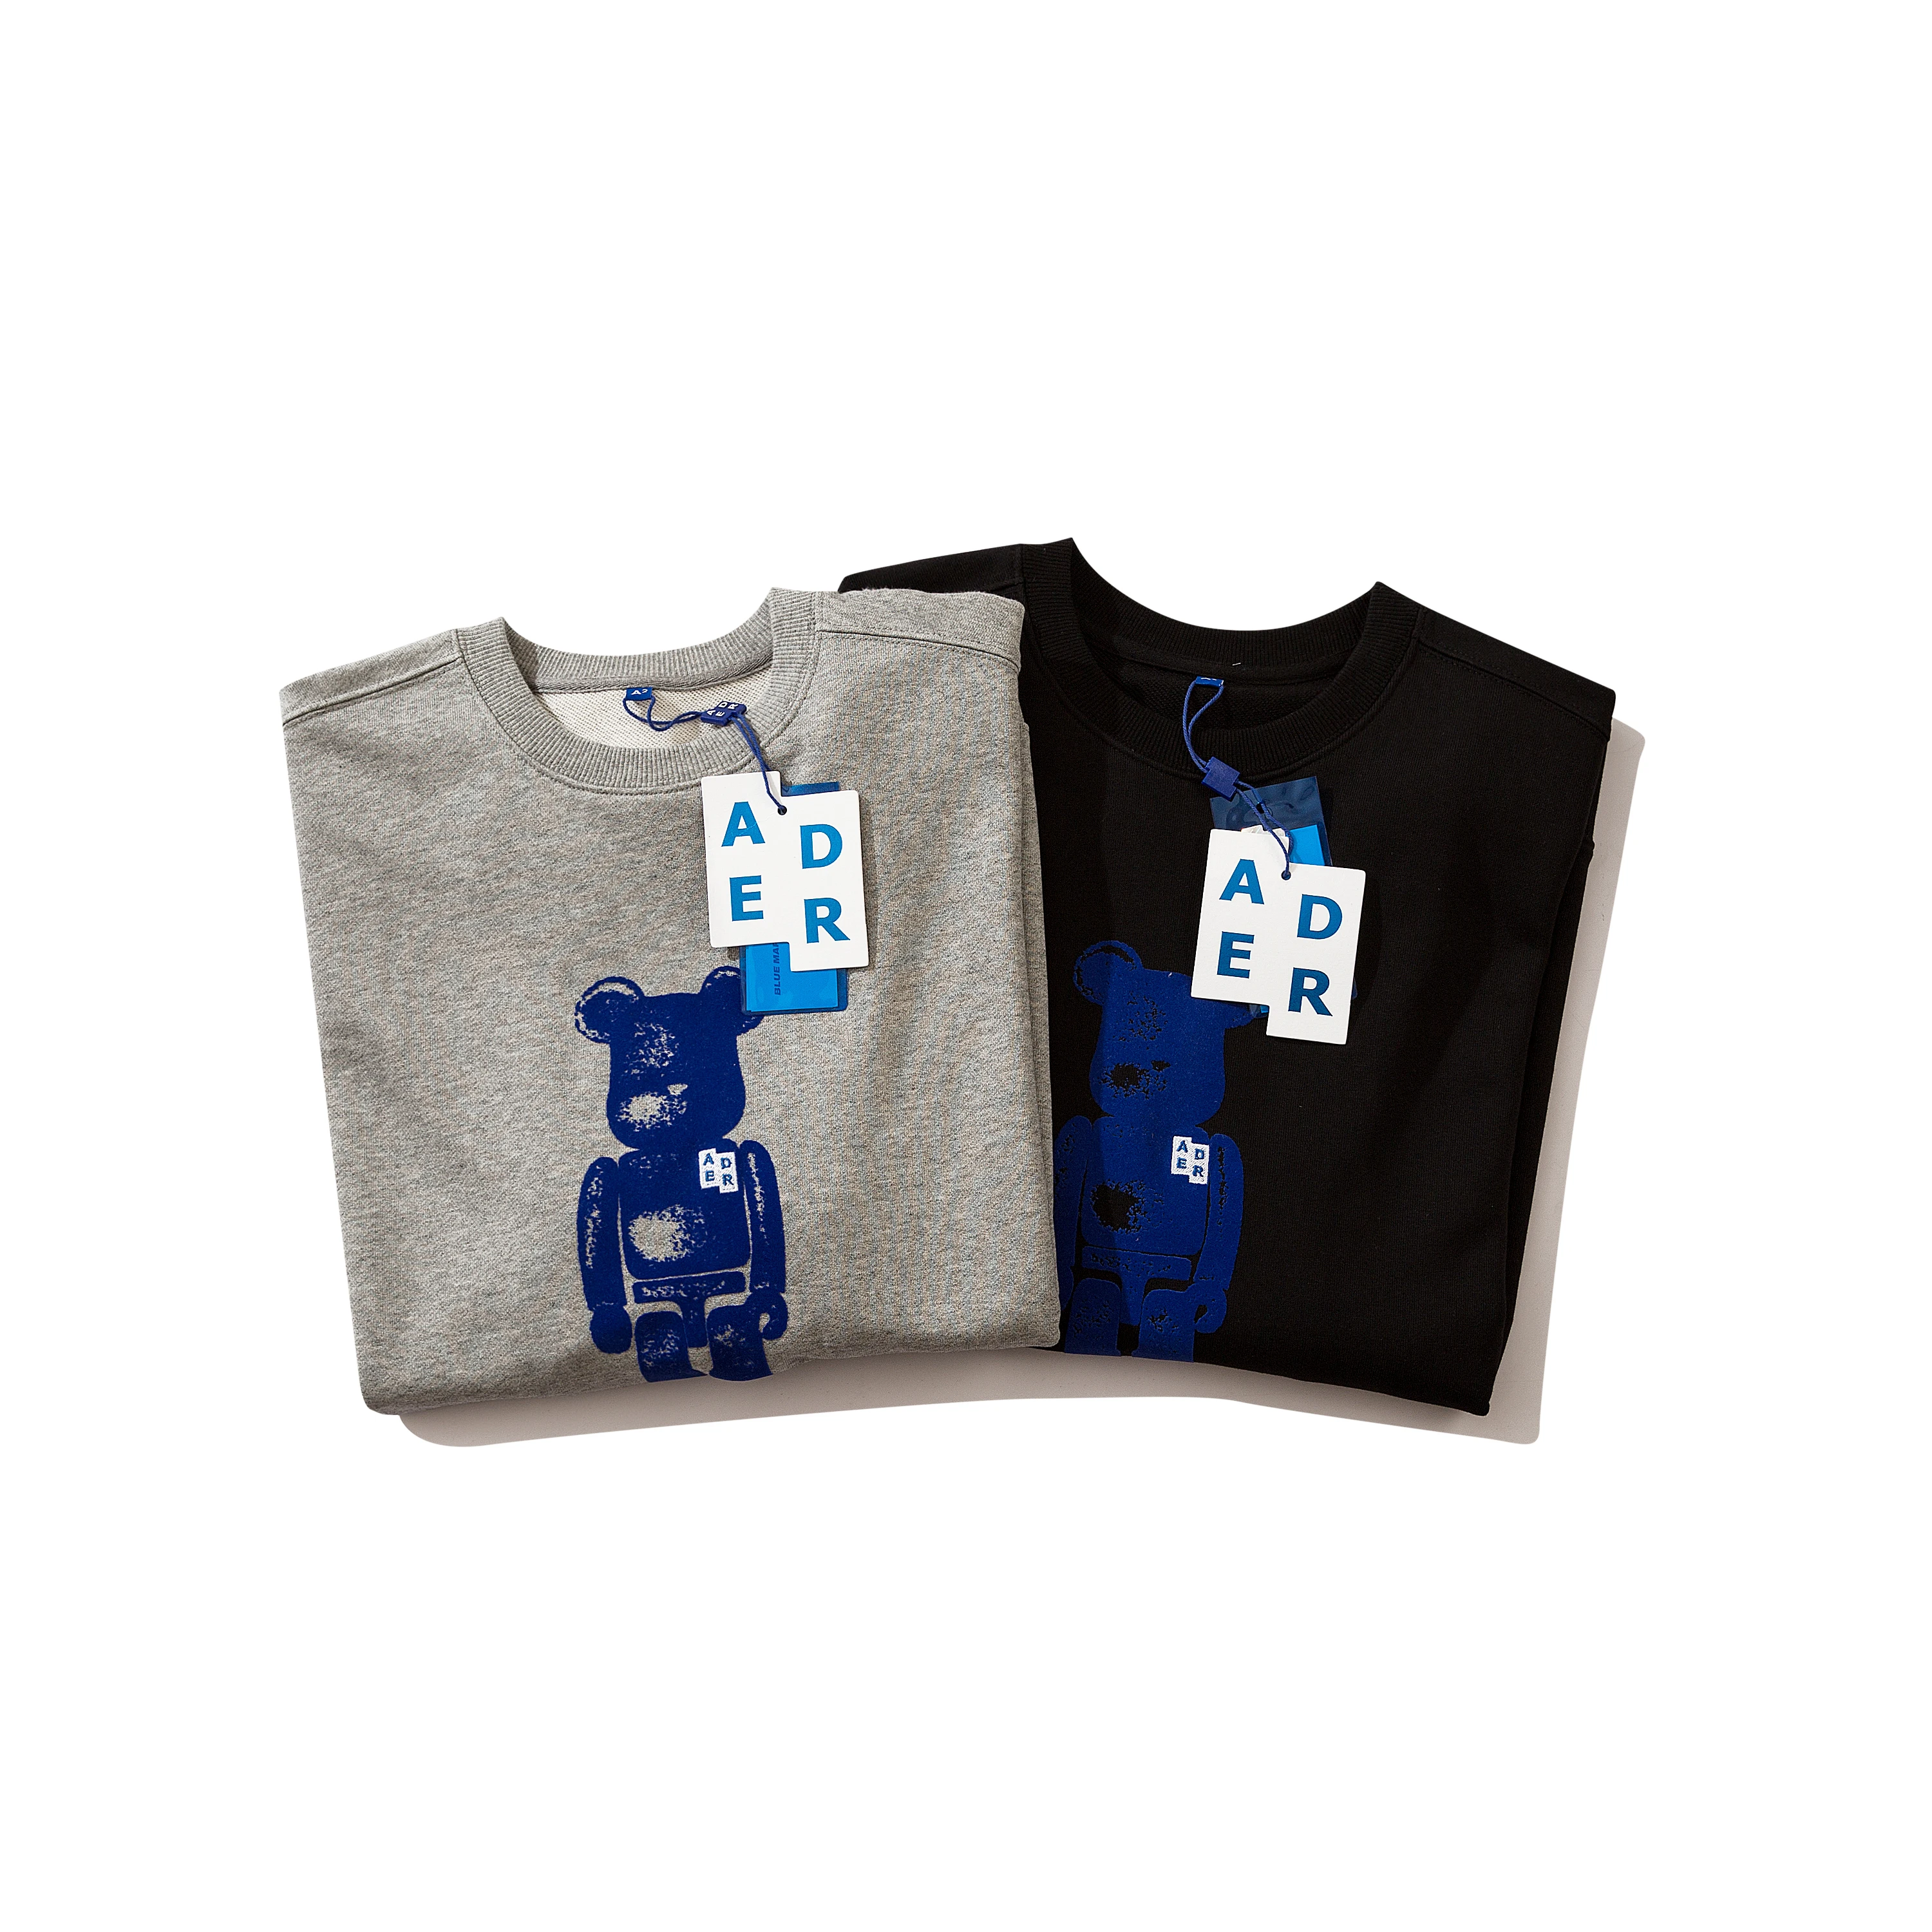 ADER New cotton all-match couple's round neck sweater